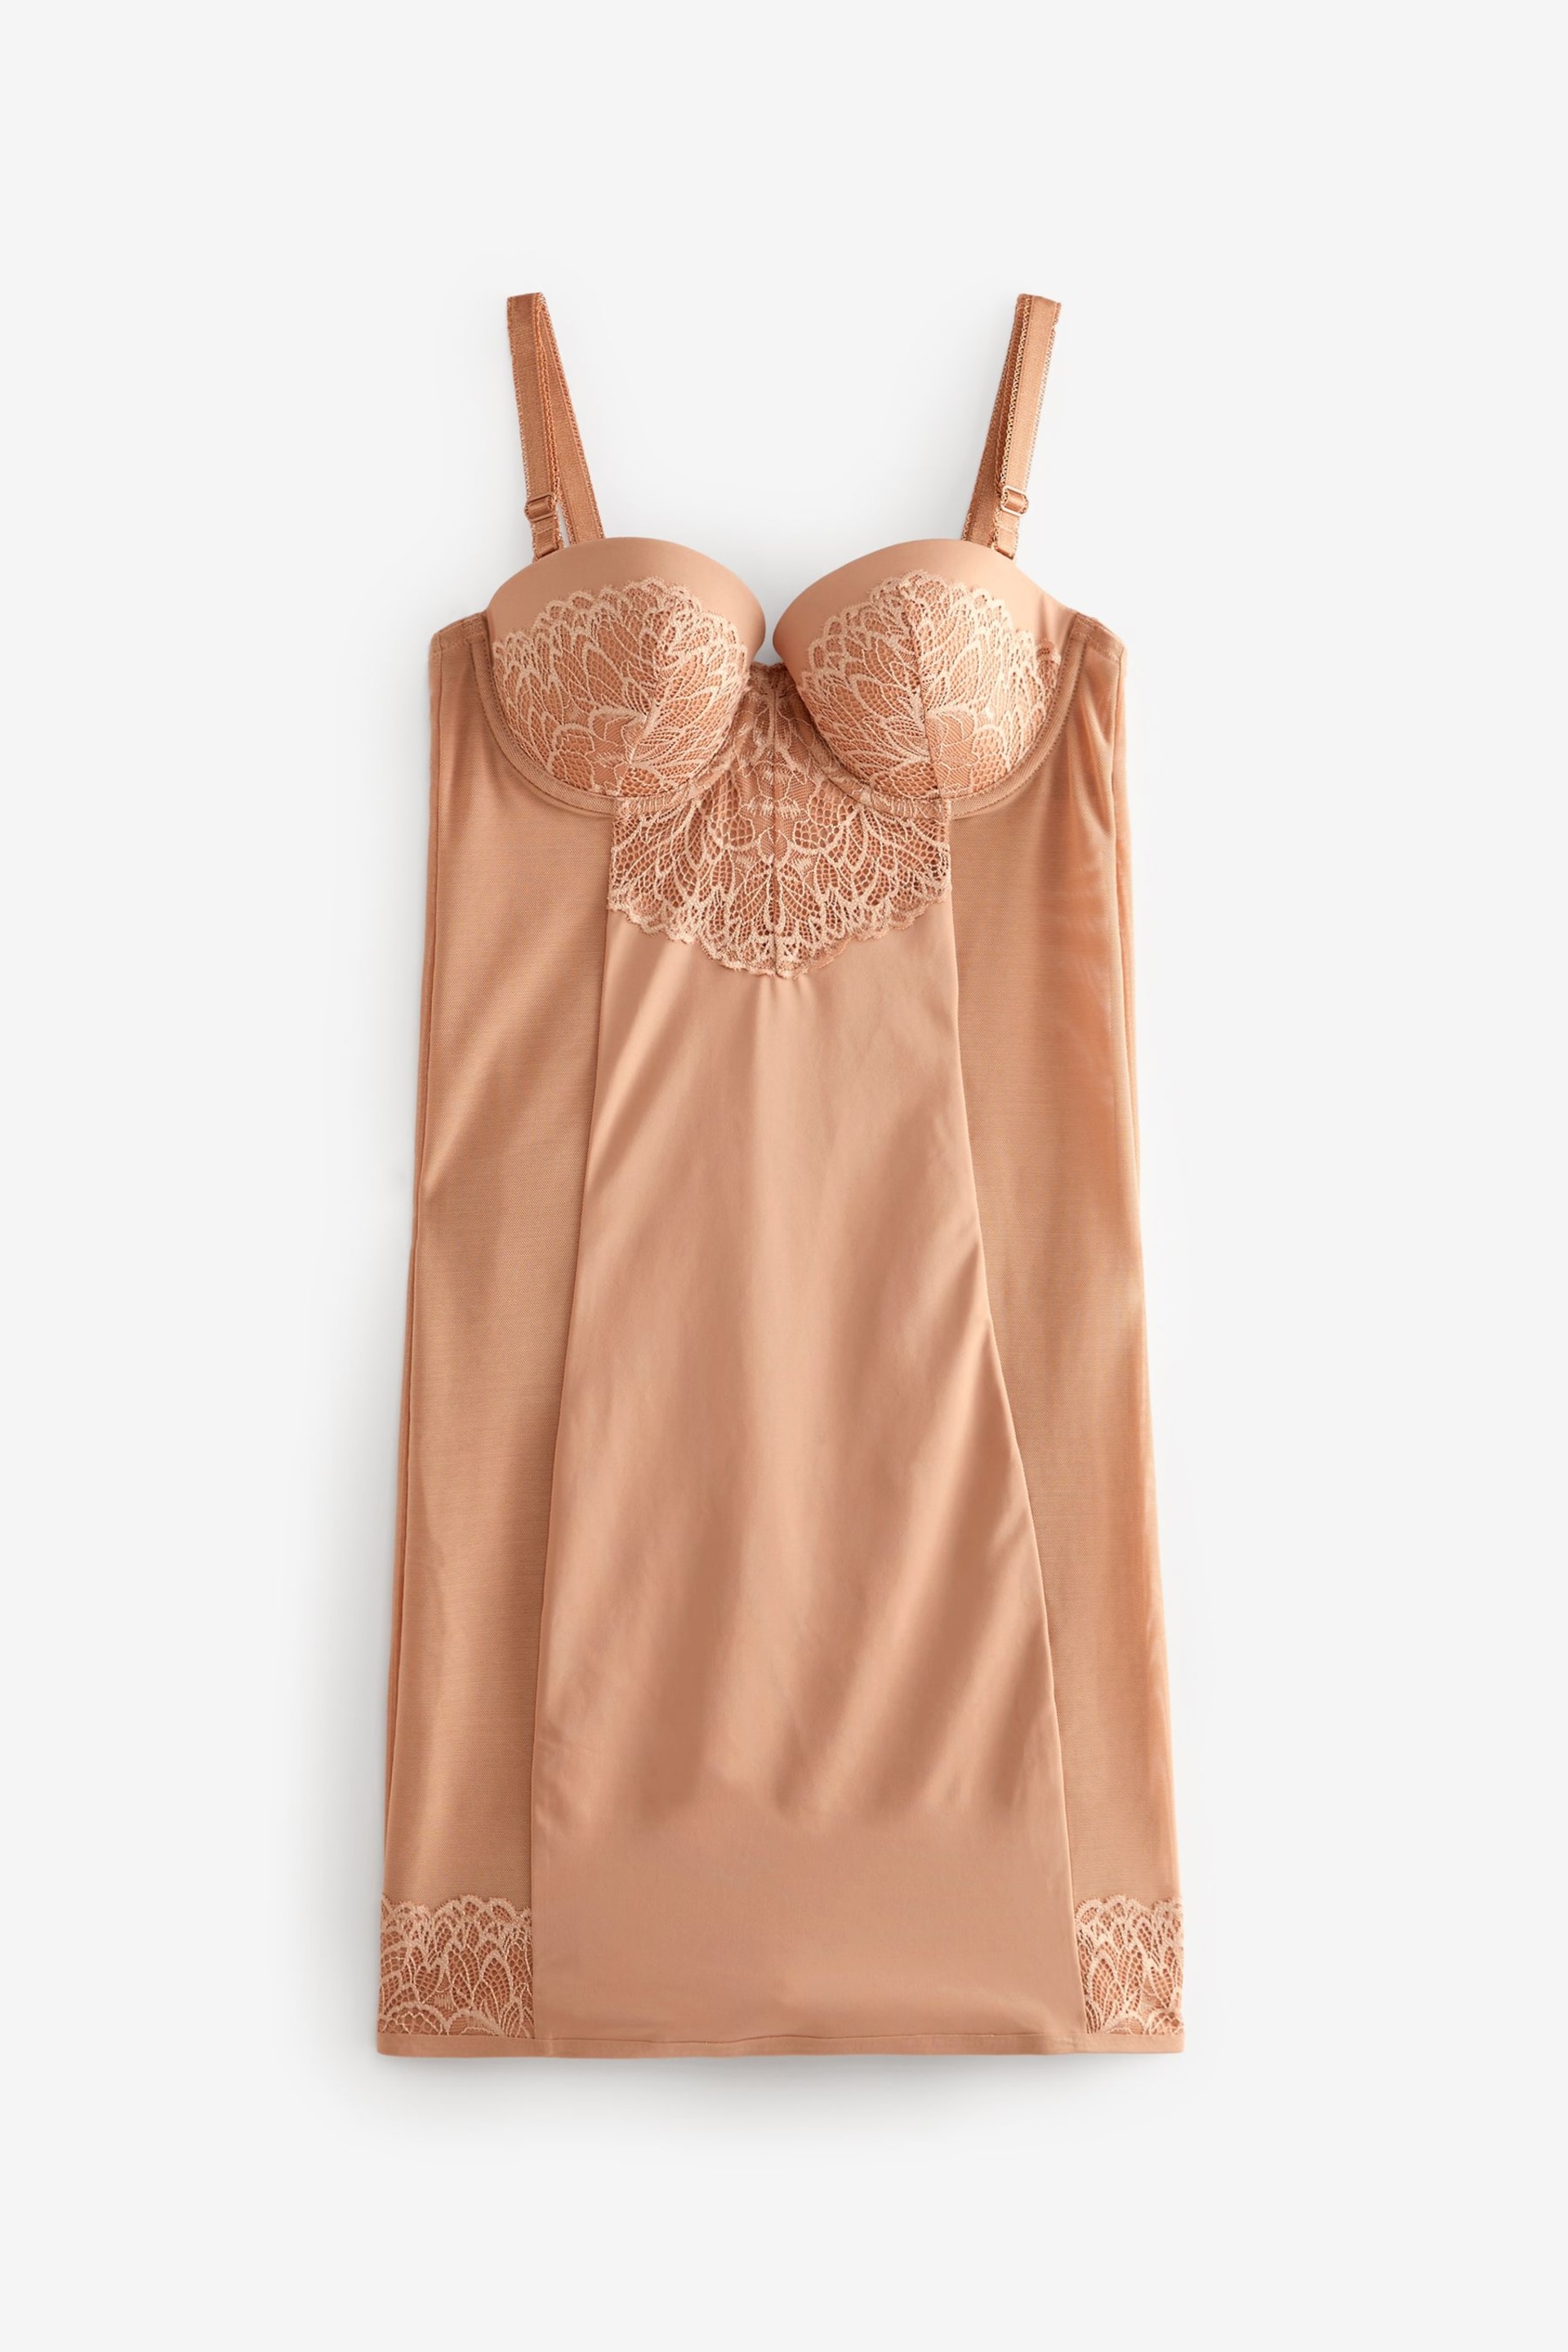 Tan Brown Firm Tummy Control Cupped Lace Slip - Image 4 of 4